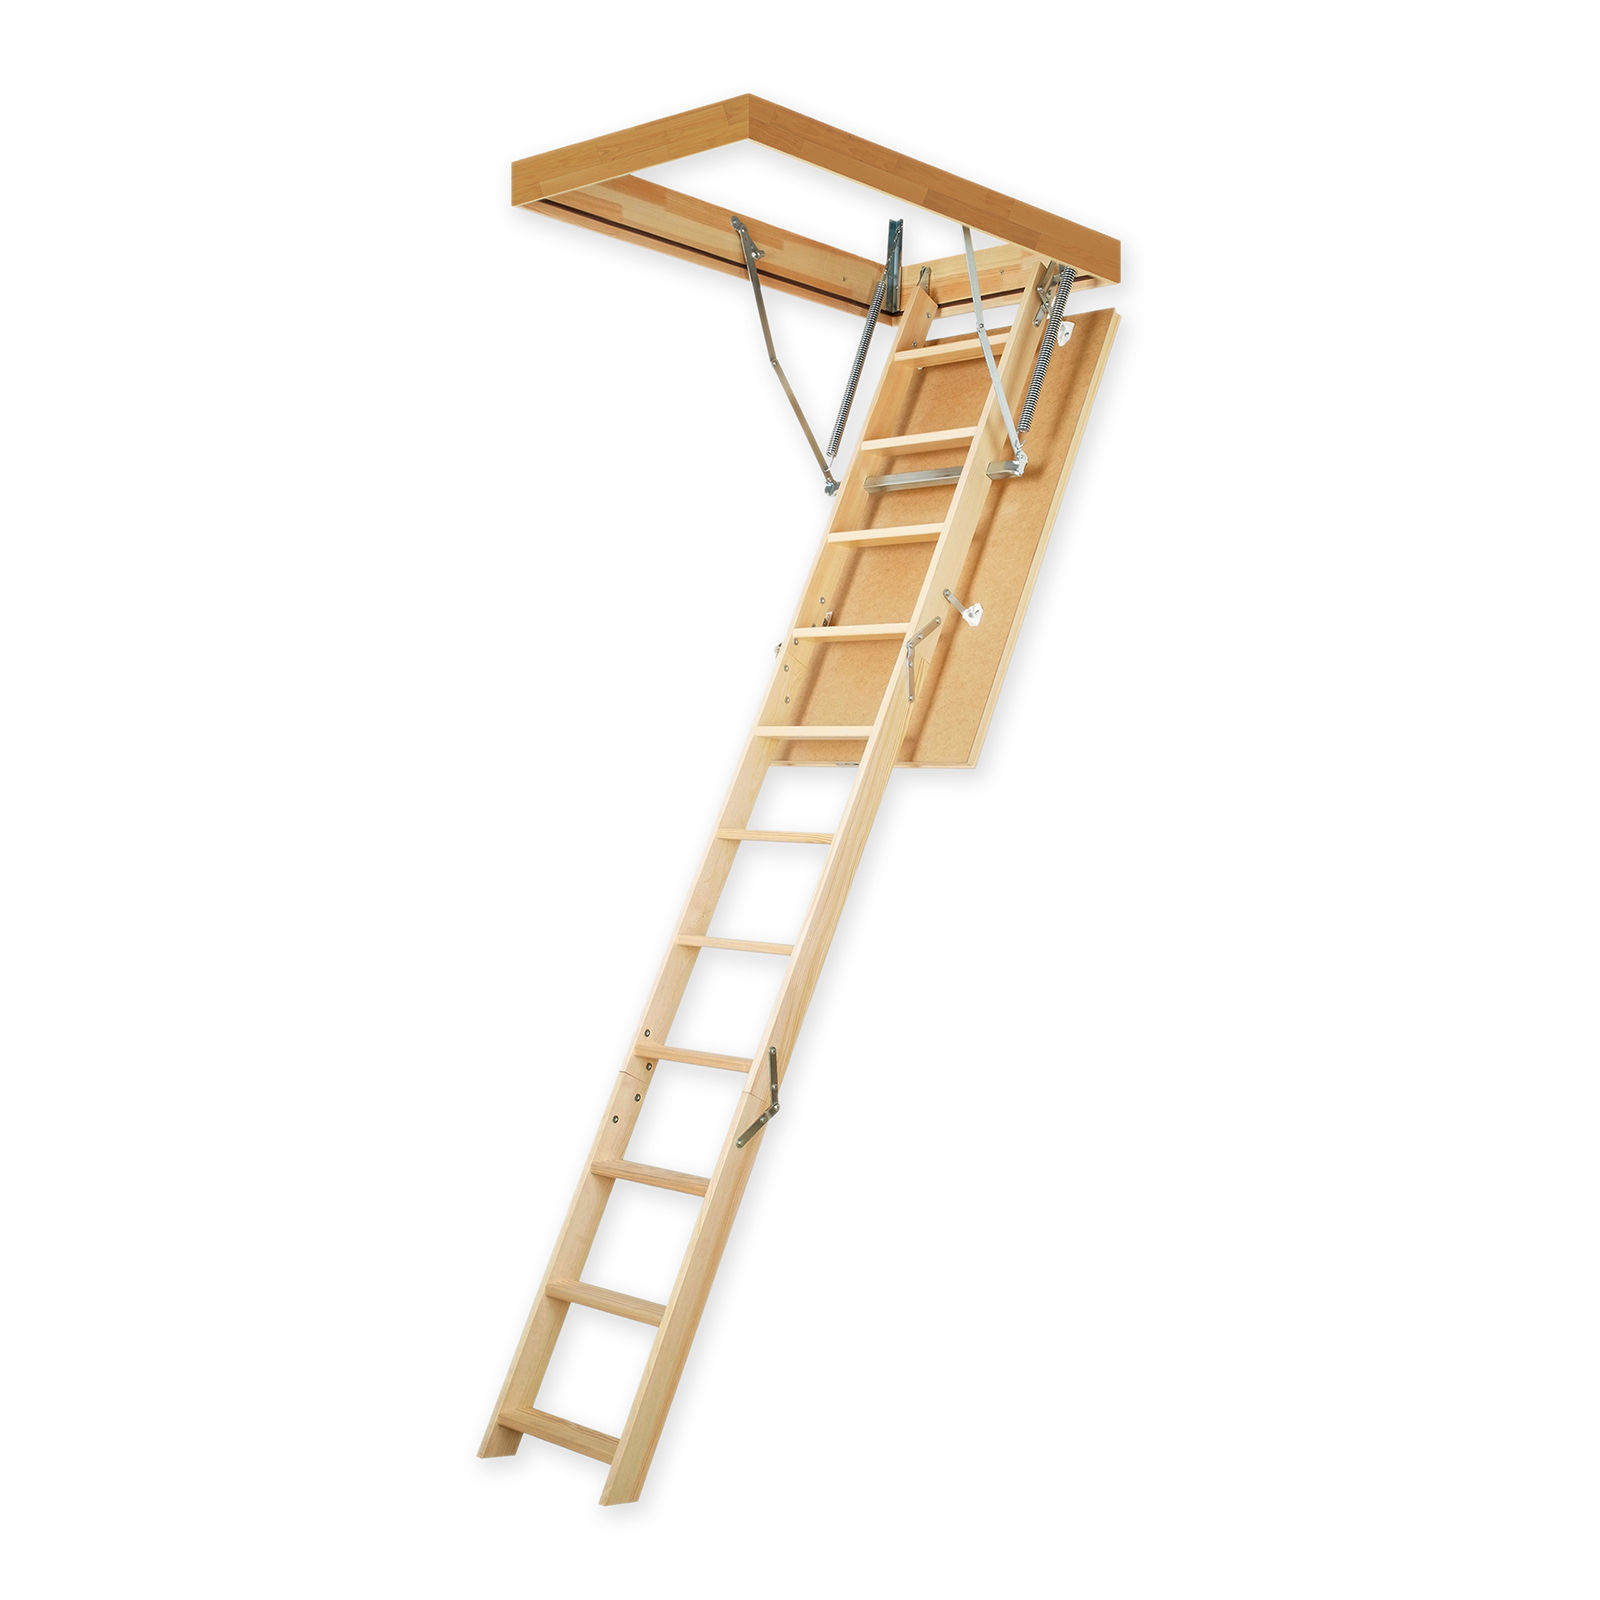 Bodentreppe Dachbodentreppe Stiege Fakro LWS 70x100cm Smart Holztreppe